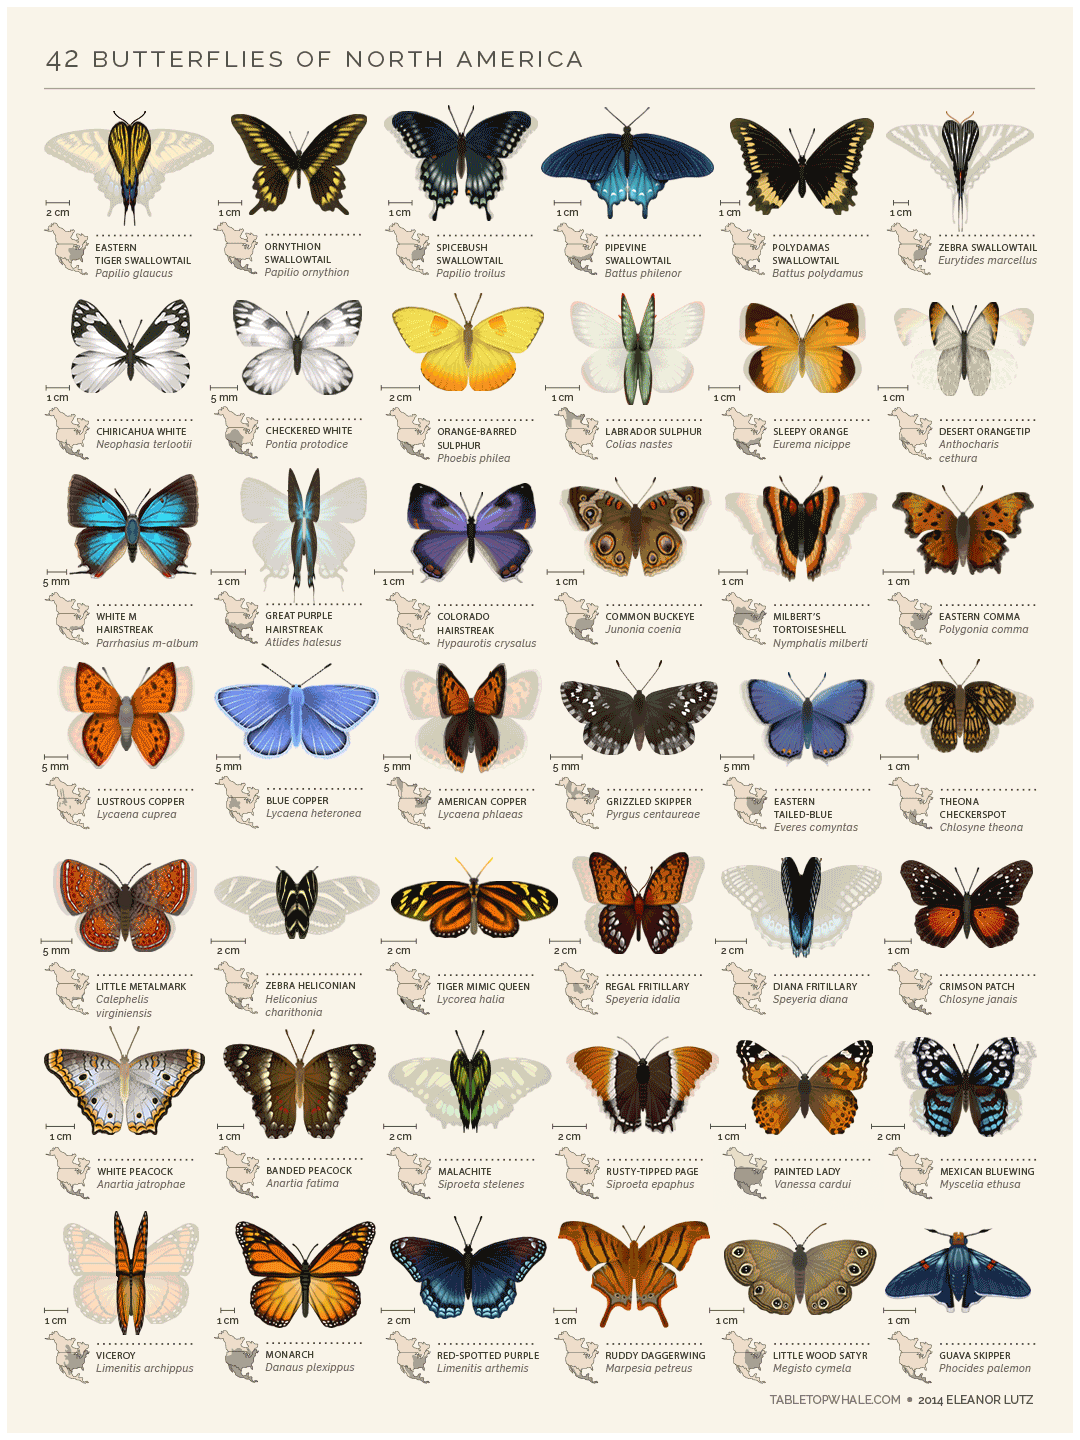 Animated GIF Poster of Butterflies from North America, with Map & Binomial Nomenclatures #Infographic